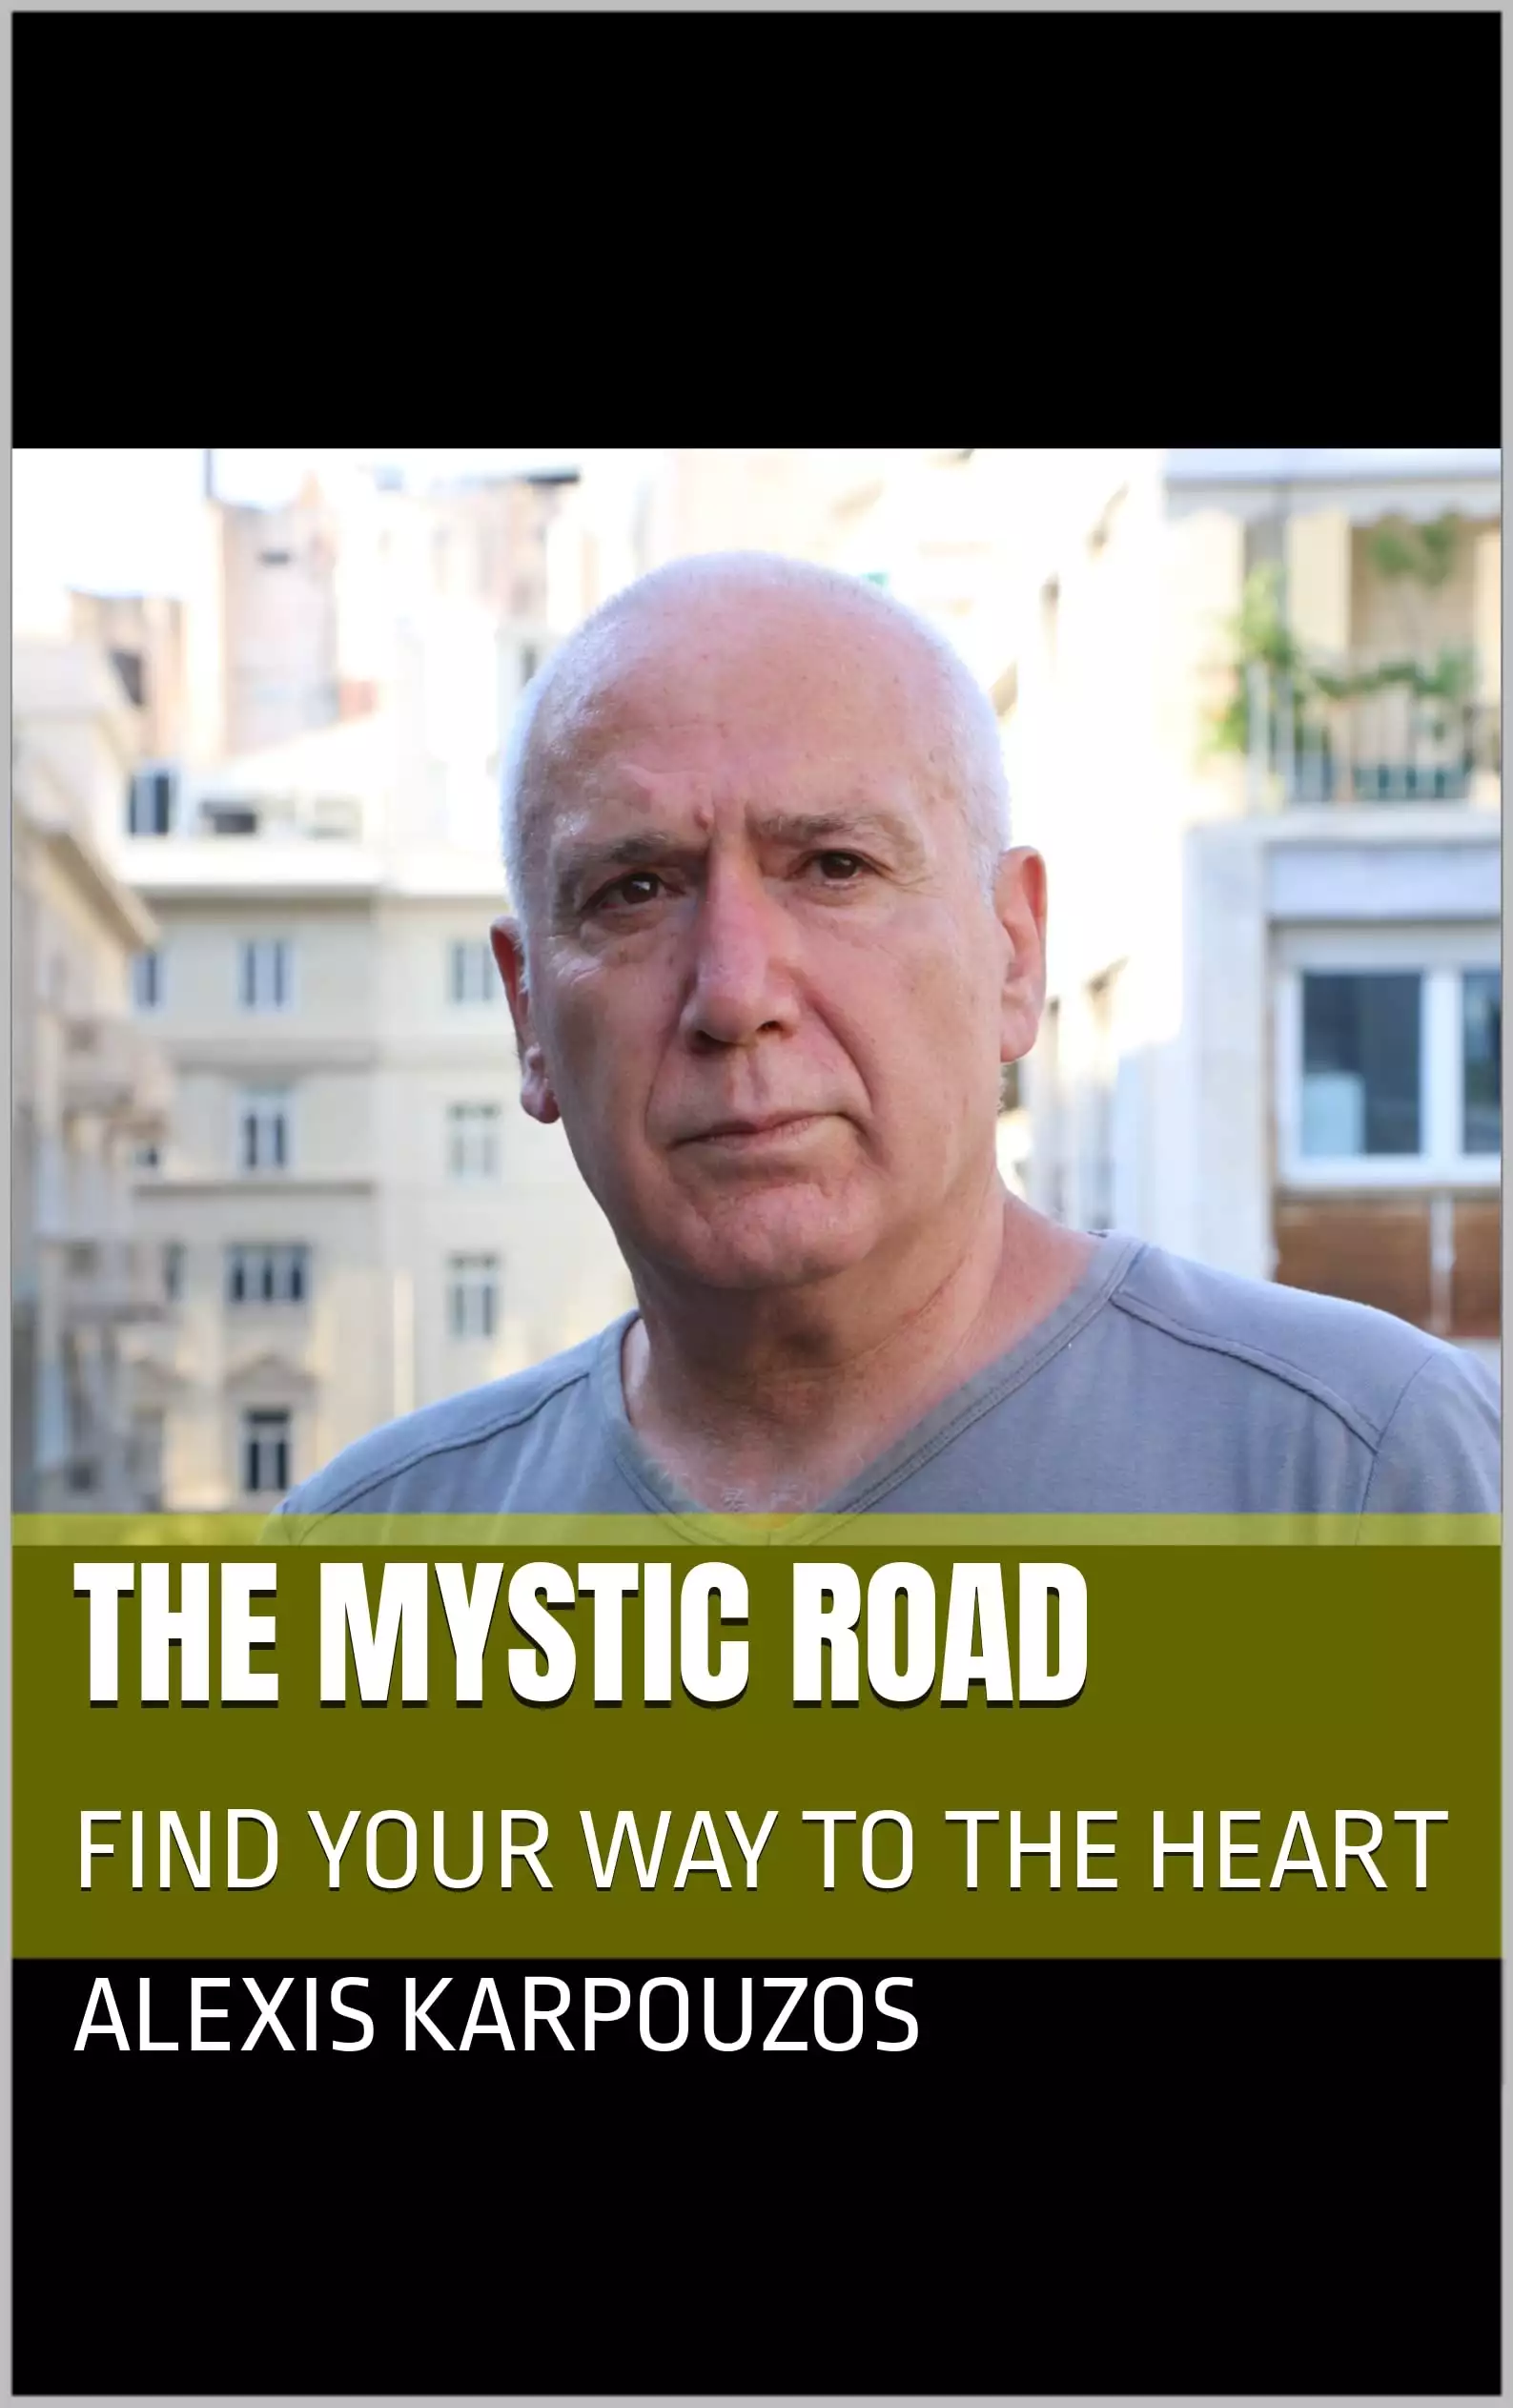 THE MYSTIC ROAD: FIND YOUR WAY TO THE HEART